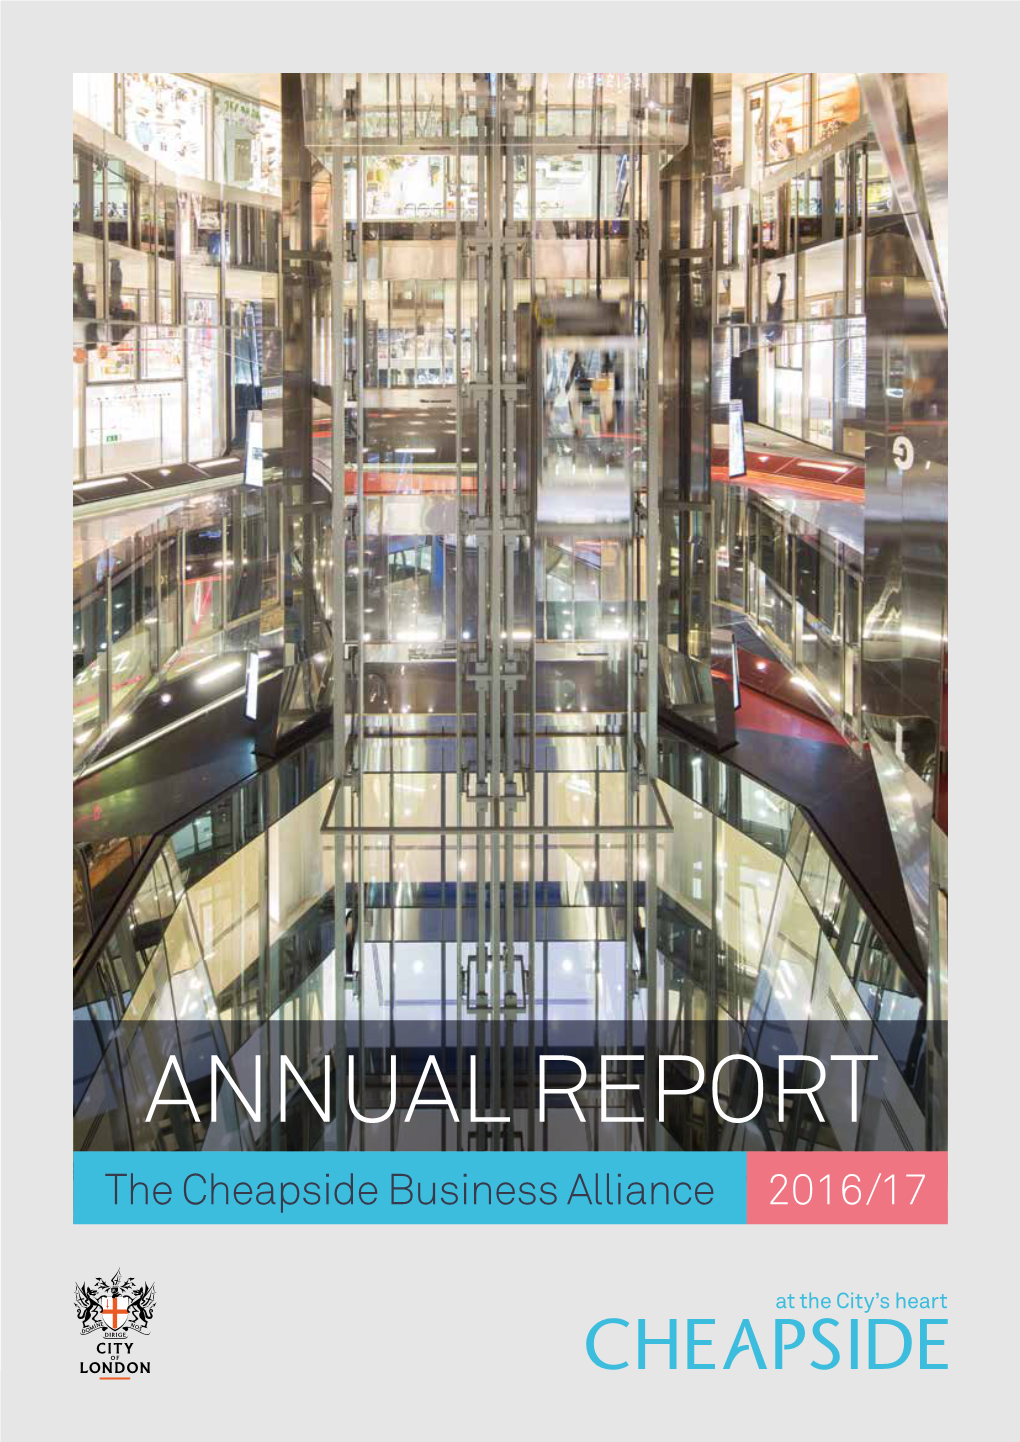 ANNUAL REPORT the Cheapside Business Alliance 2016/17